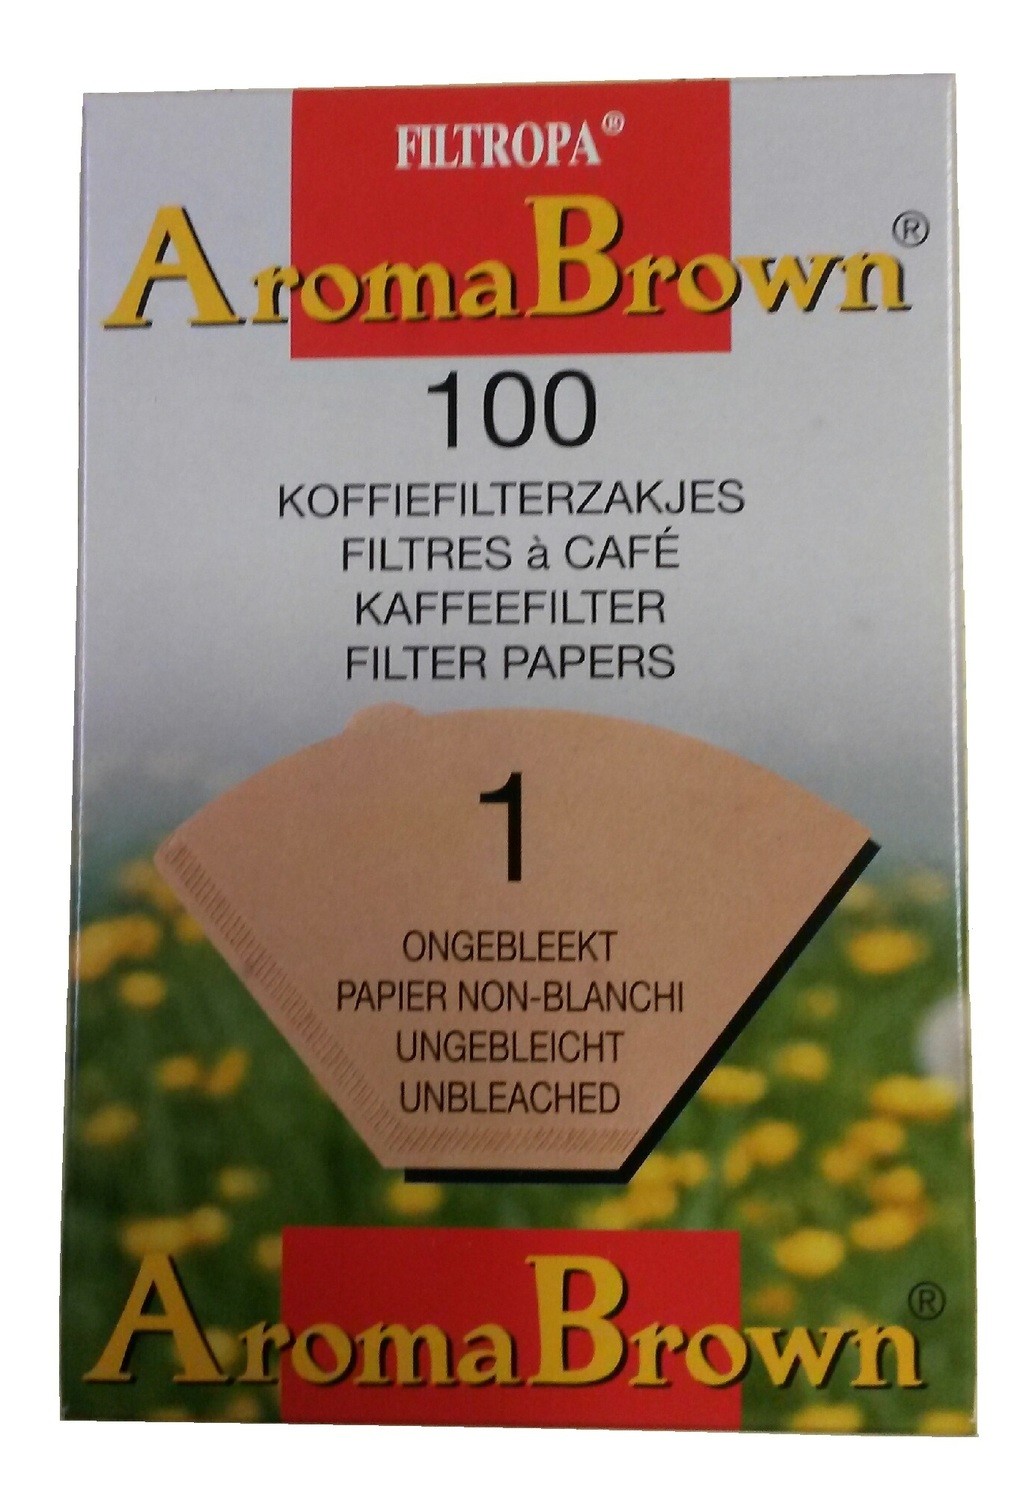 Filtropa Natural Brown Filters #1, 100 count box, 30 box CASE